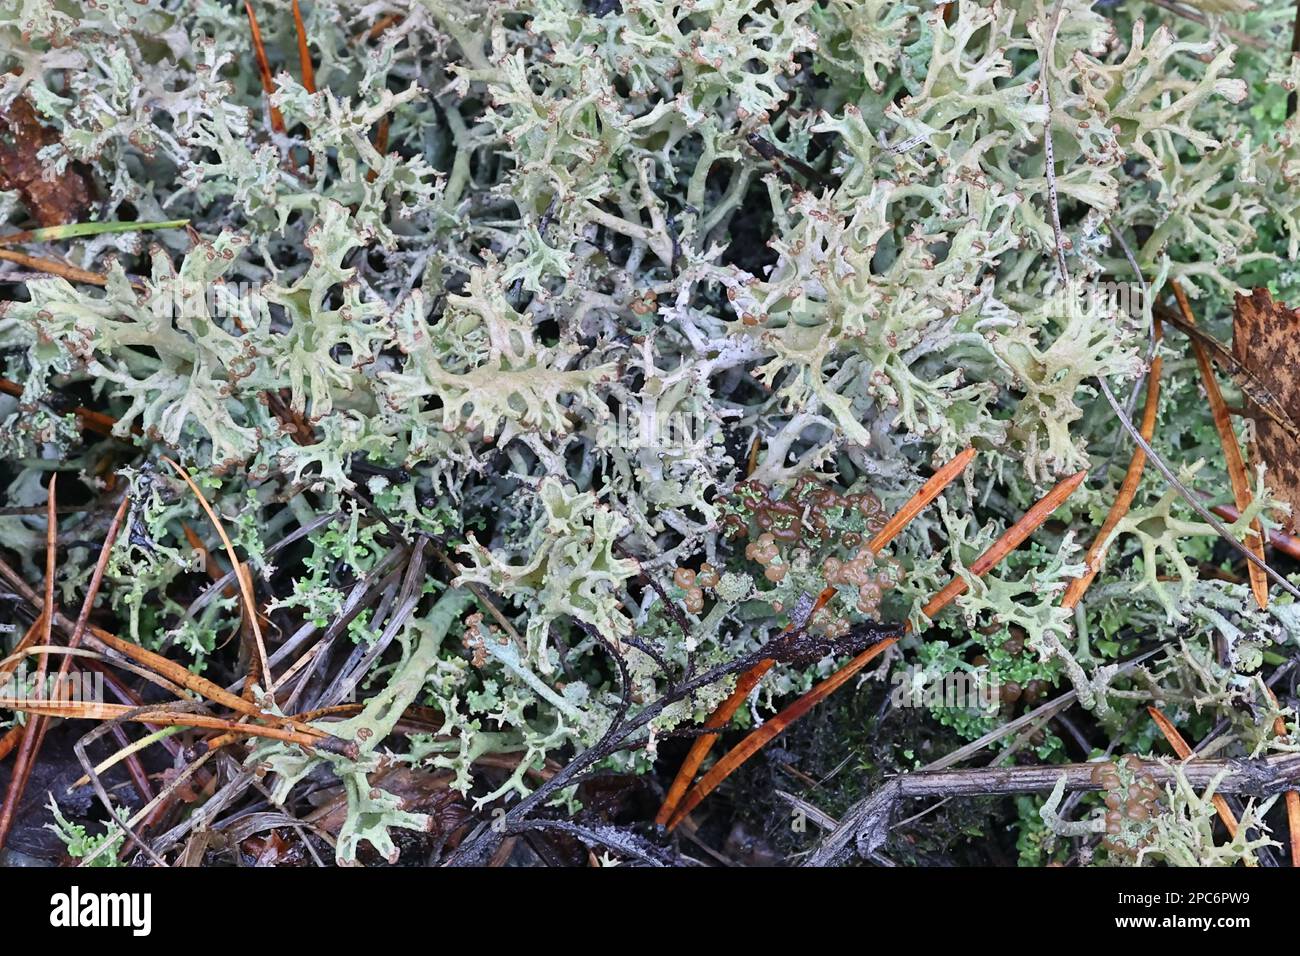 Cladonia crispata, commonly known as organ-pipe lichen, cup-bearing lichens from Finland Stock Photo